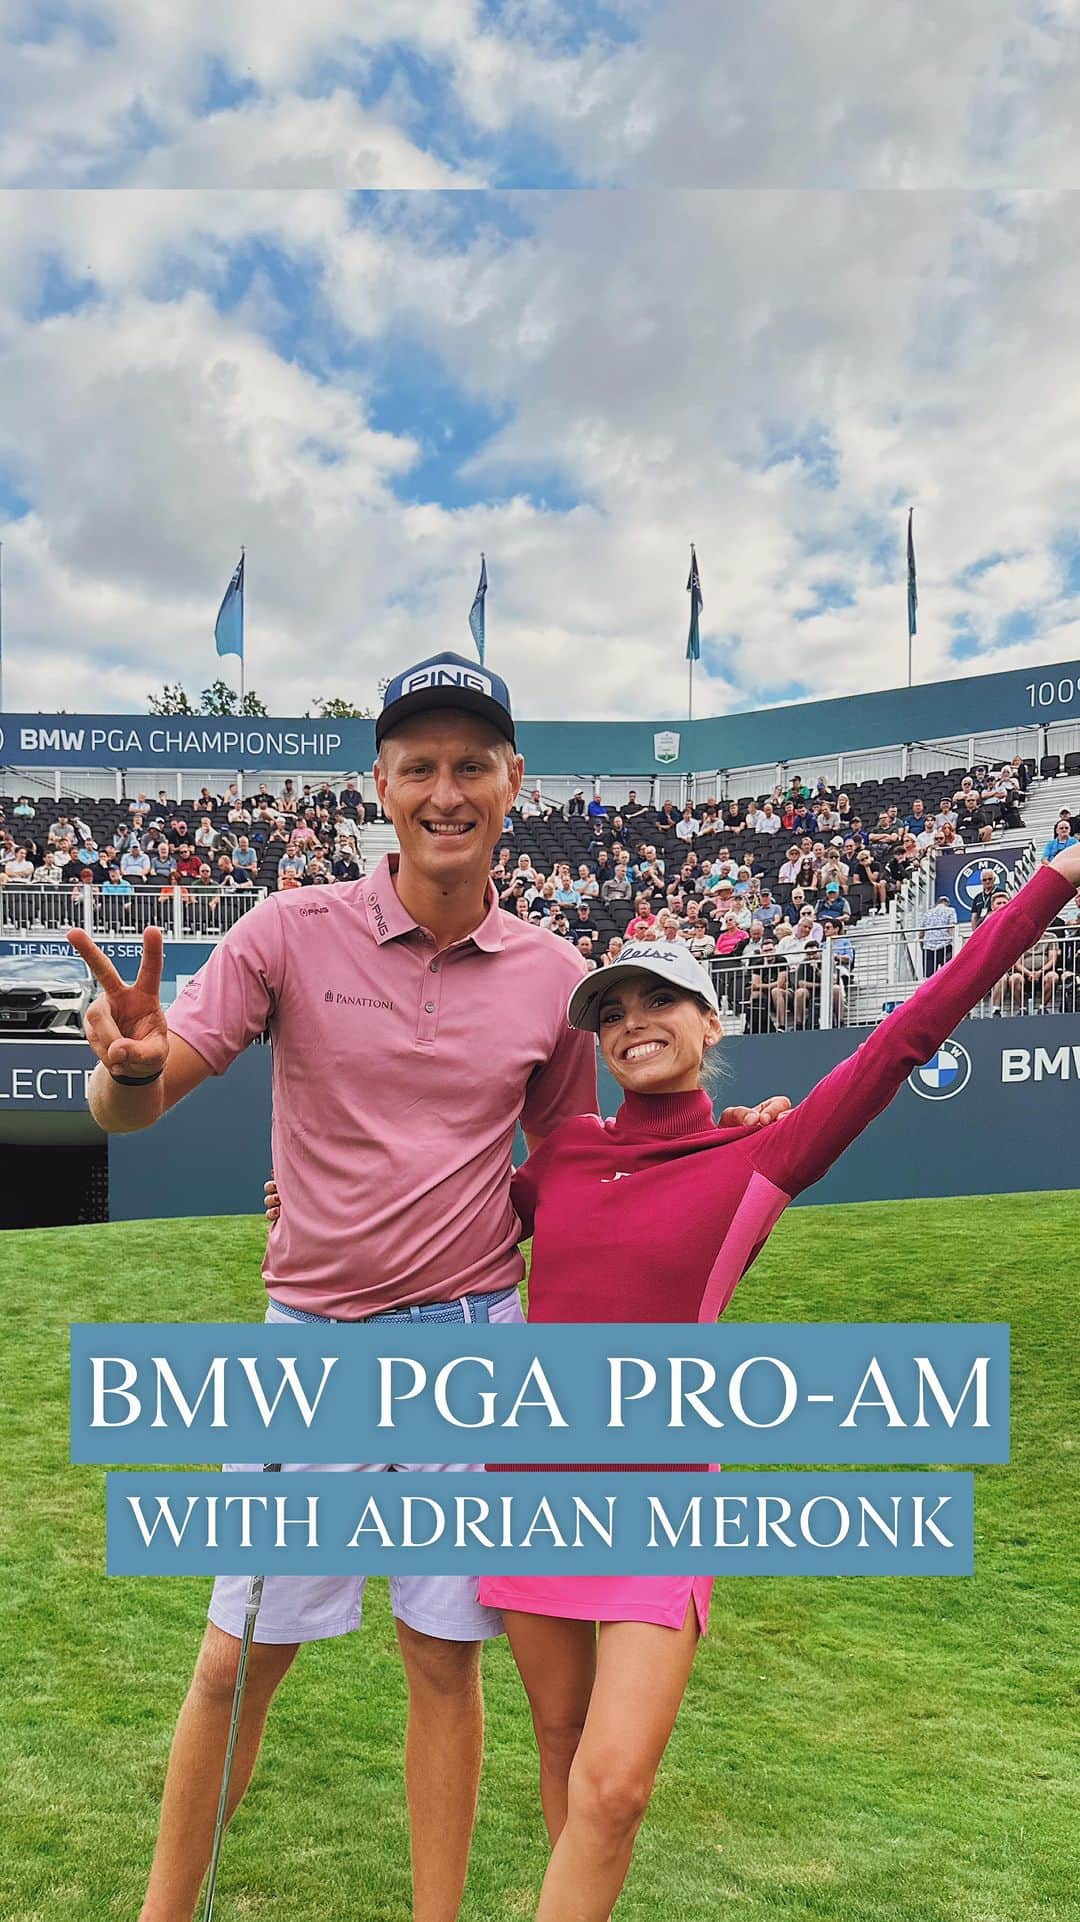 @LONDON | TAG #THISISLONDONのインスタグラム：「⛳️ @Alice.Sampo playing with @Adrian_Meronk for an unforgettable #BMWPGA Pro-Am! 🥰 Playing with Adrian was incredible! He hit Birdie, Eagle, Birdie, Birdie, Birdie on the first 5 holes! 😱😱 I also managed a few birdies and some Par’s which helped the team lead through the first 9 holes! I’ll never forget the feeling! 😭🙌🏼🥰 Thank you @BMWUK @BMWPGA for an incredible day! And @MrLondon & @PaoloCave for your incredible support - I couldn’t have done it without you! Here’s to more beautiful rounds of golf! 🙏🏼🙏🏼❤️❤️  ___________________________________________  #thisislondon #lovelondon #london #londra #londonlife #londres #uk #visitlondon #british #🇬🇧 #golf #golflife #golfswing #golfaddict #golfstagram #golfer #golfcourse #wentworth #surrey #bmw #pga #adrianmeronk」